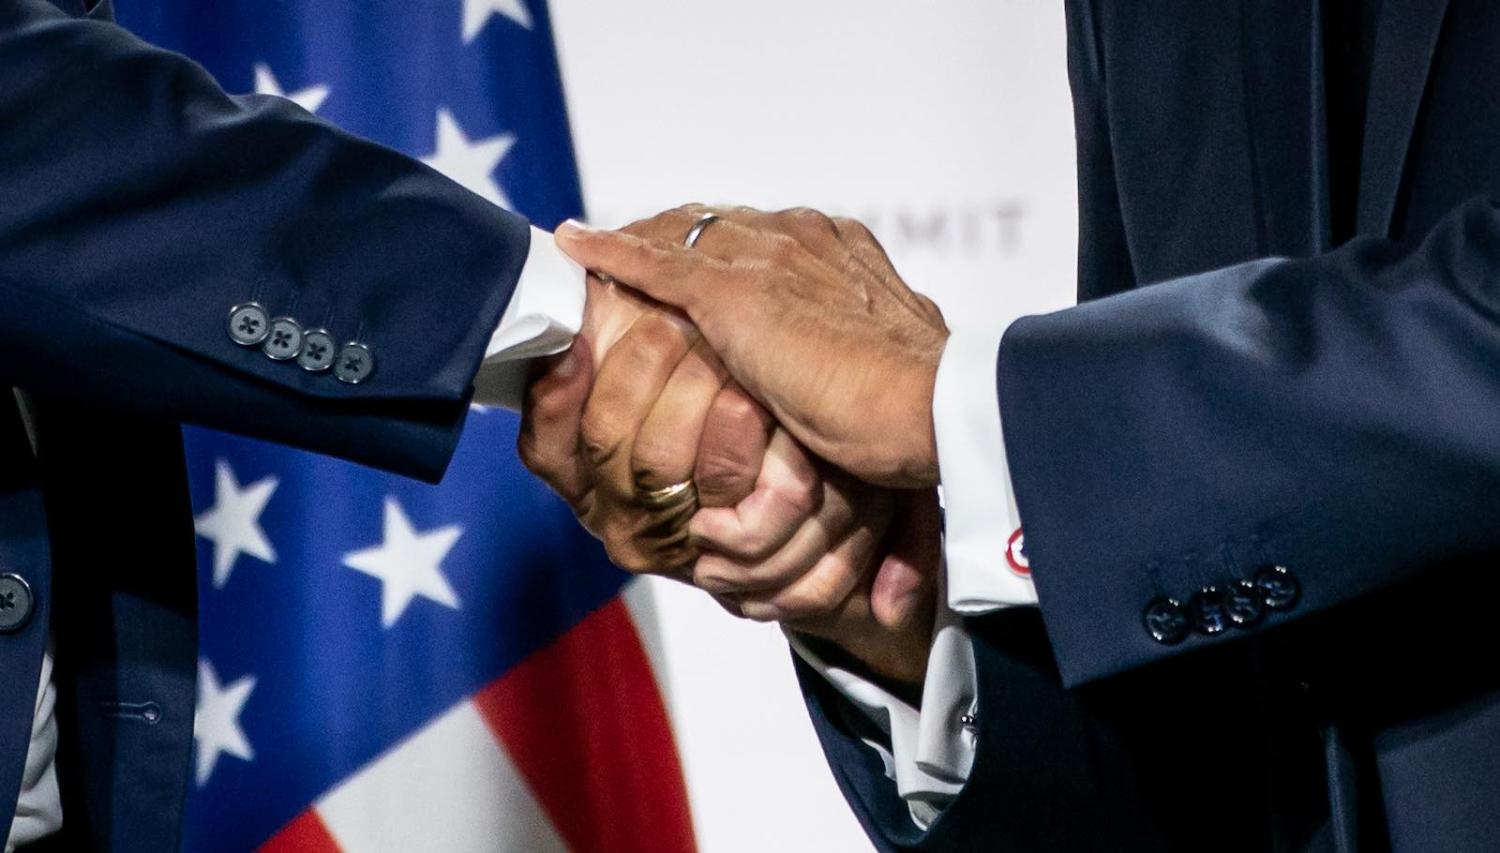 US President Trump and French President Emmanuel Macron shake hands at the final press conference of the G7 Summit, Biarritz, France, 26 August 2019 (Photo: Michael Kappeler via Getty)